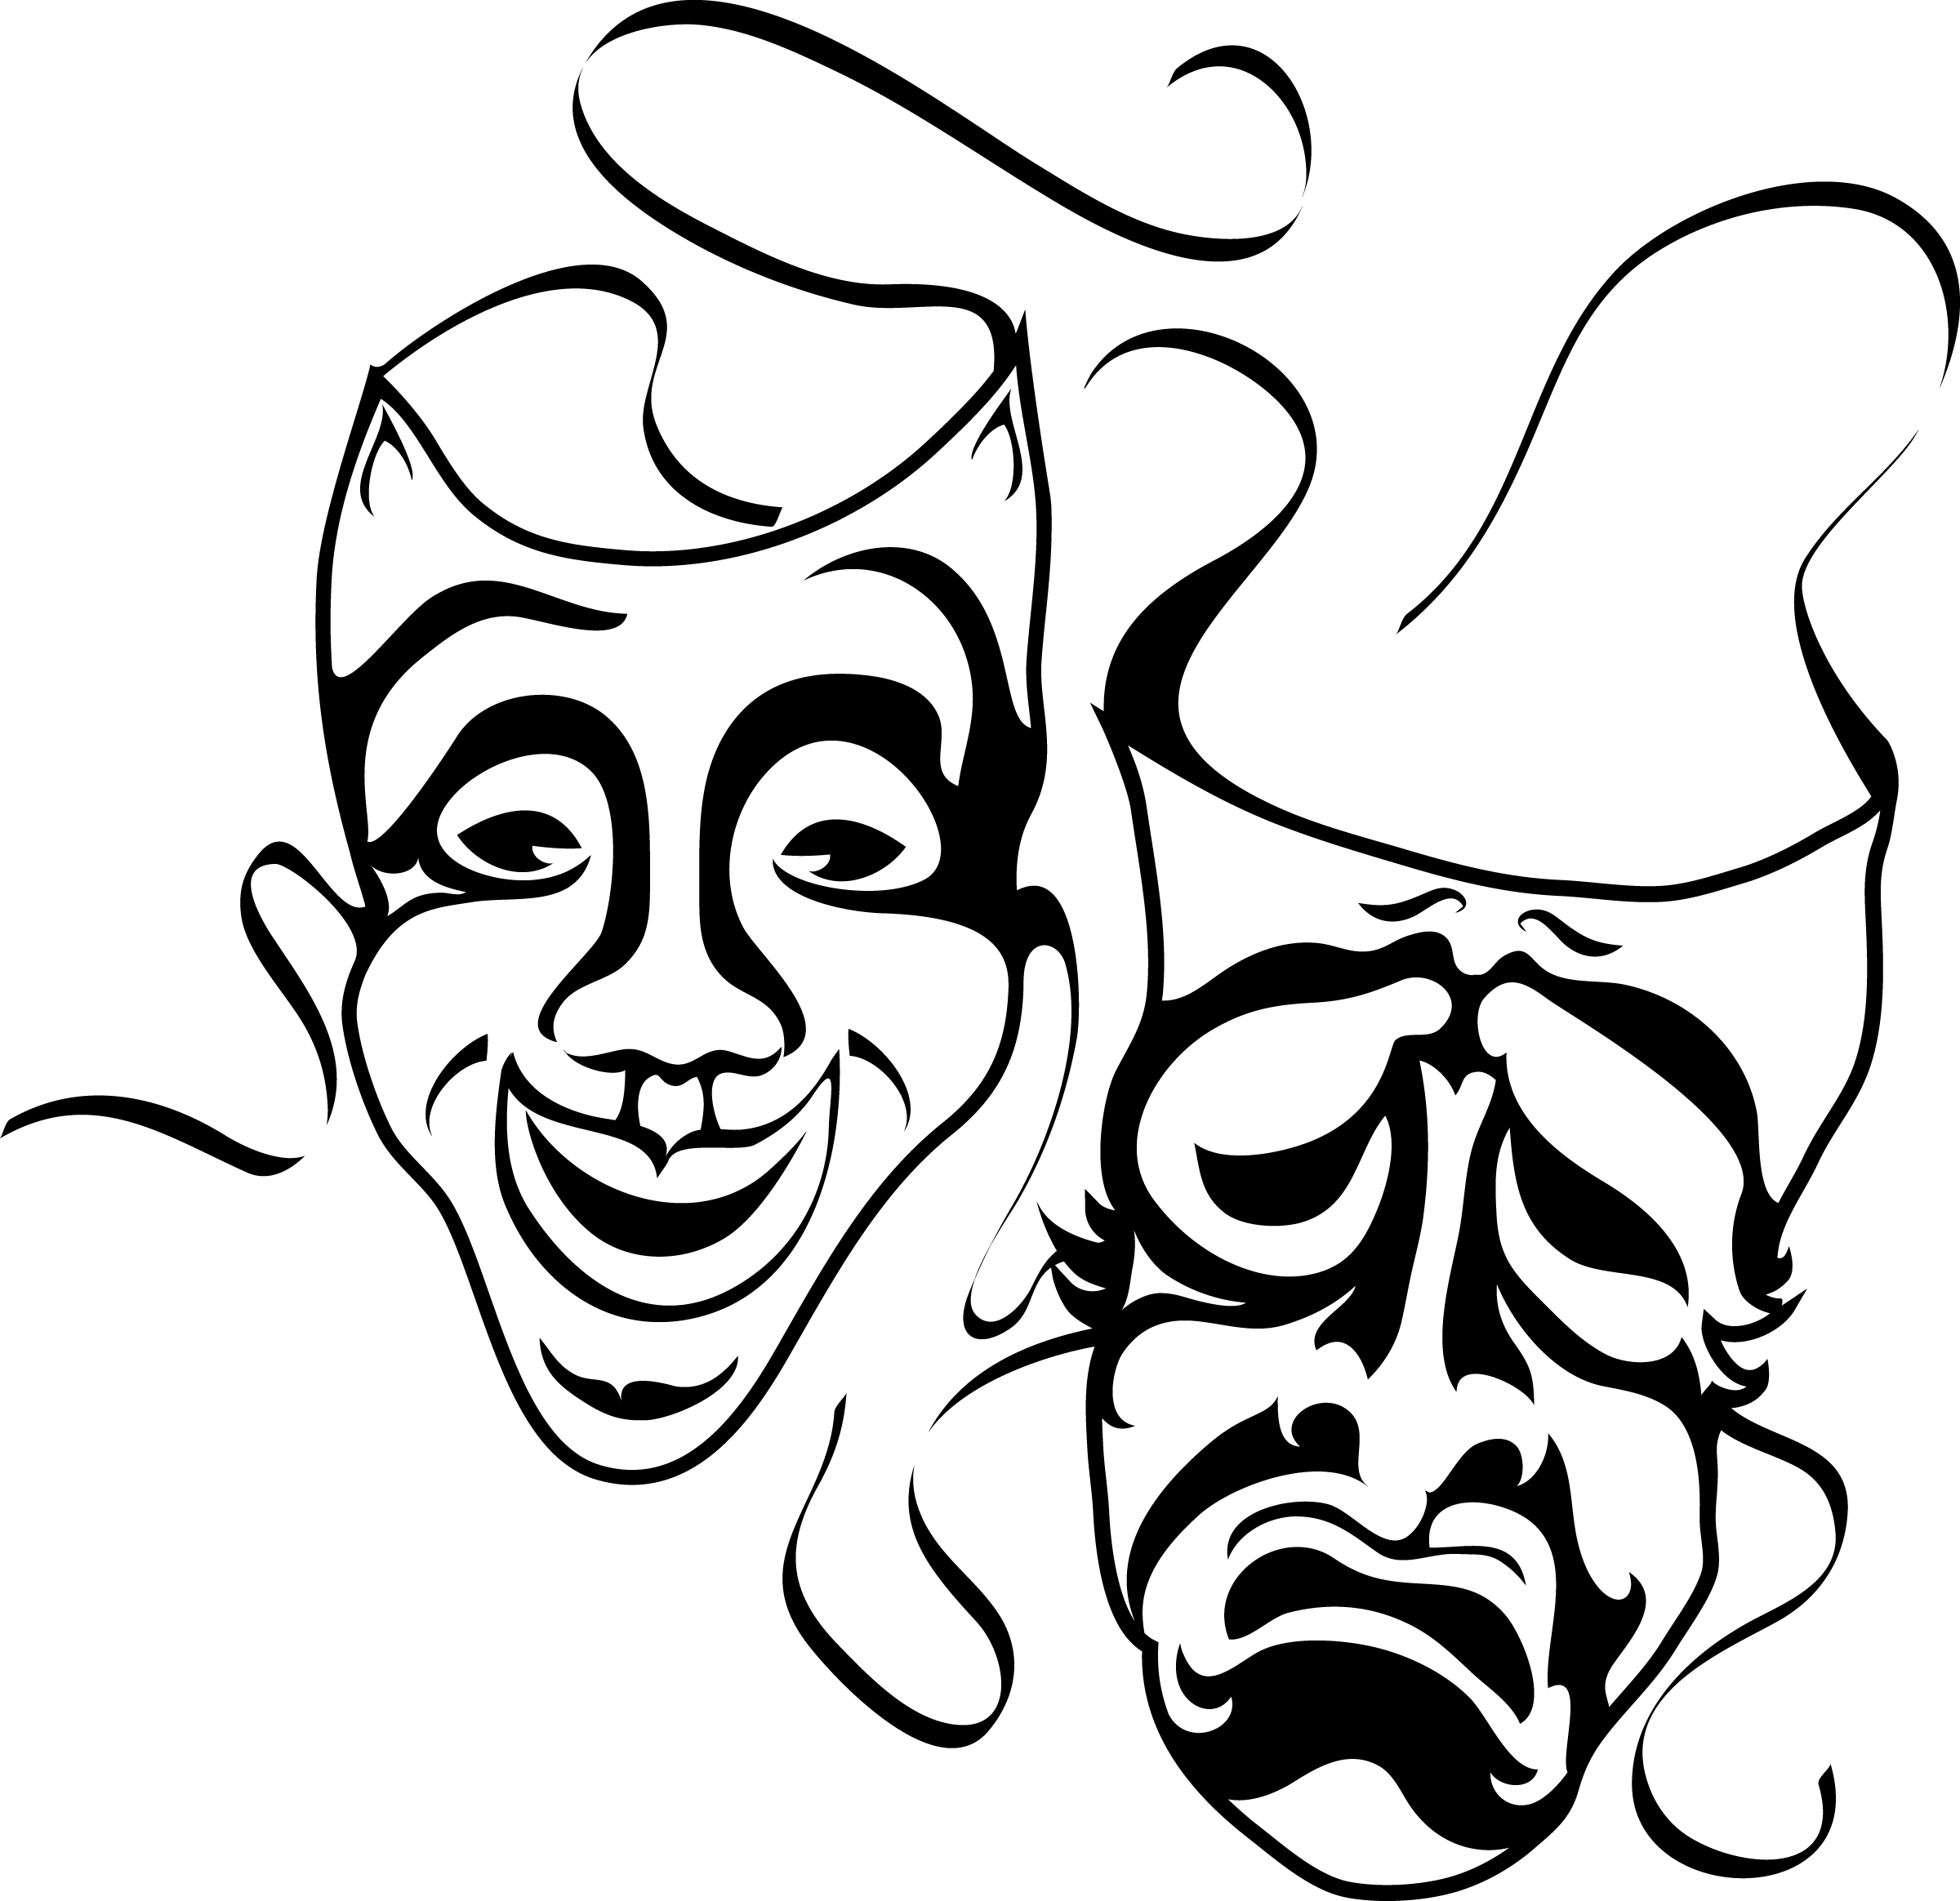 Comedy Tragedy Drama Faces - ClipArt Best